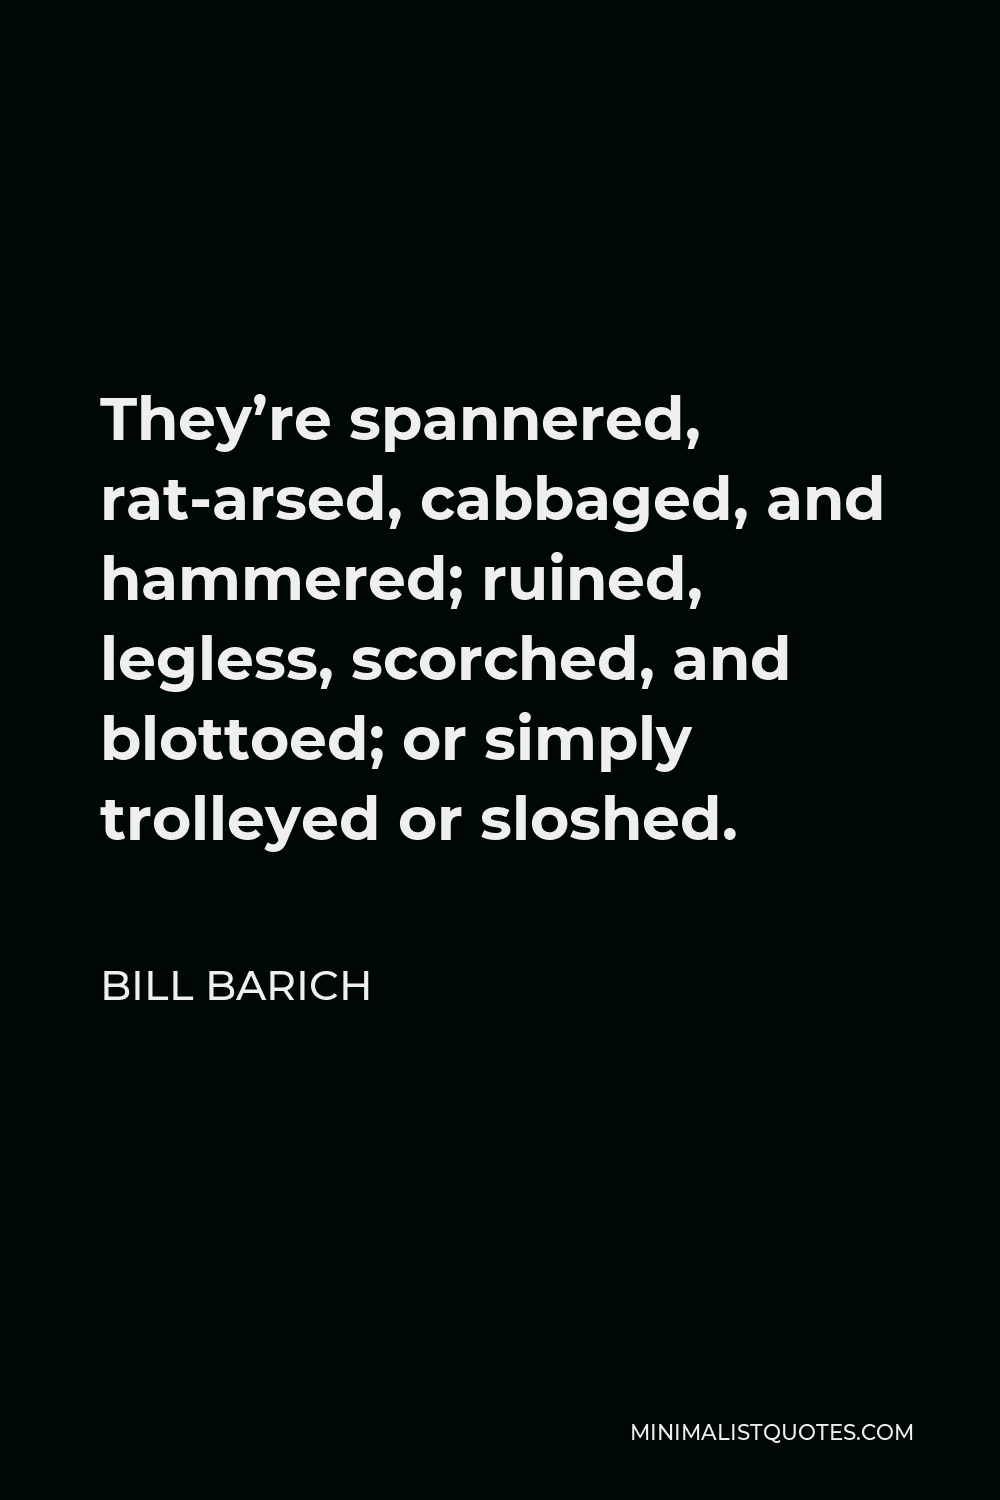 Bill Barich Quote - They’re spannered, rat-arsed, cabbaged, and hammered; ruined, legless, scorched, and blottoed; or simply trolleyed or sloshed.